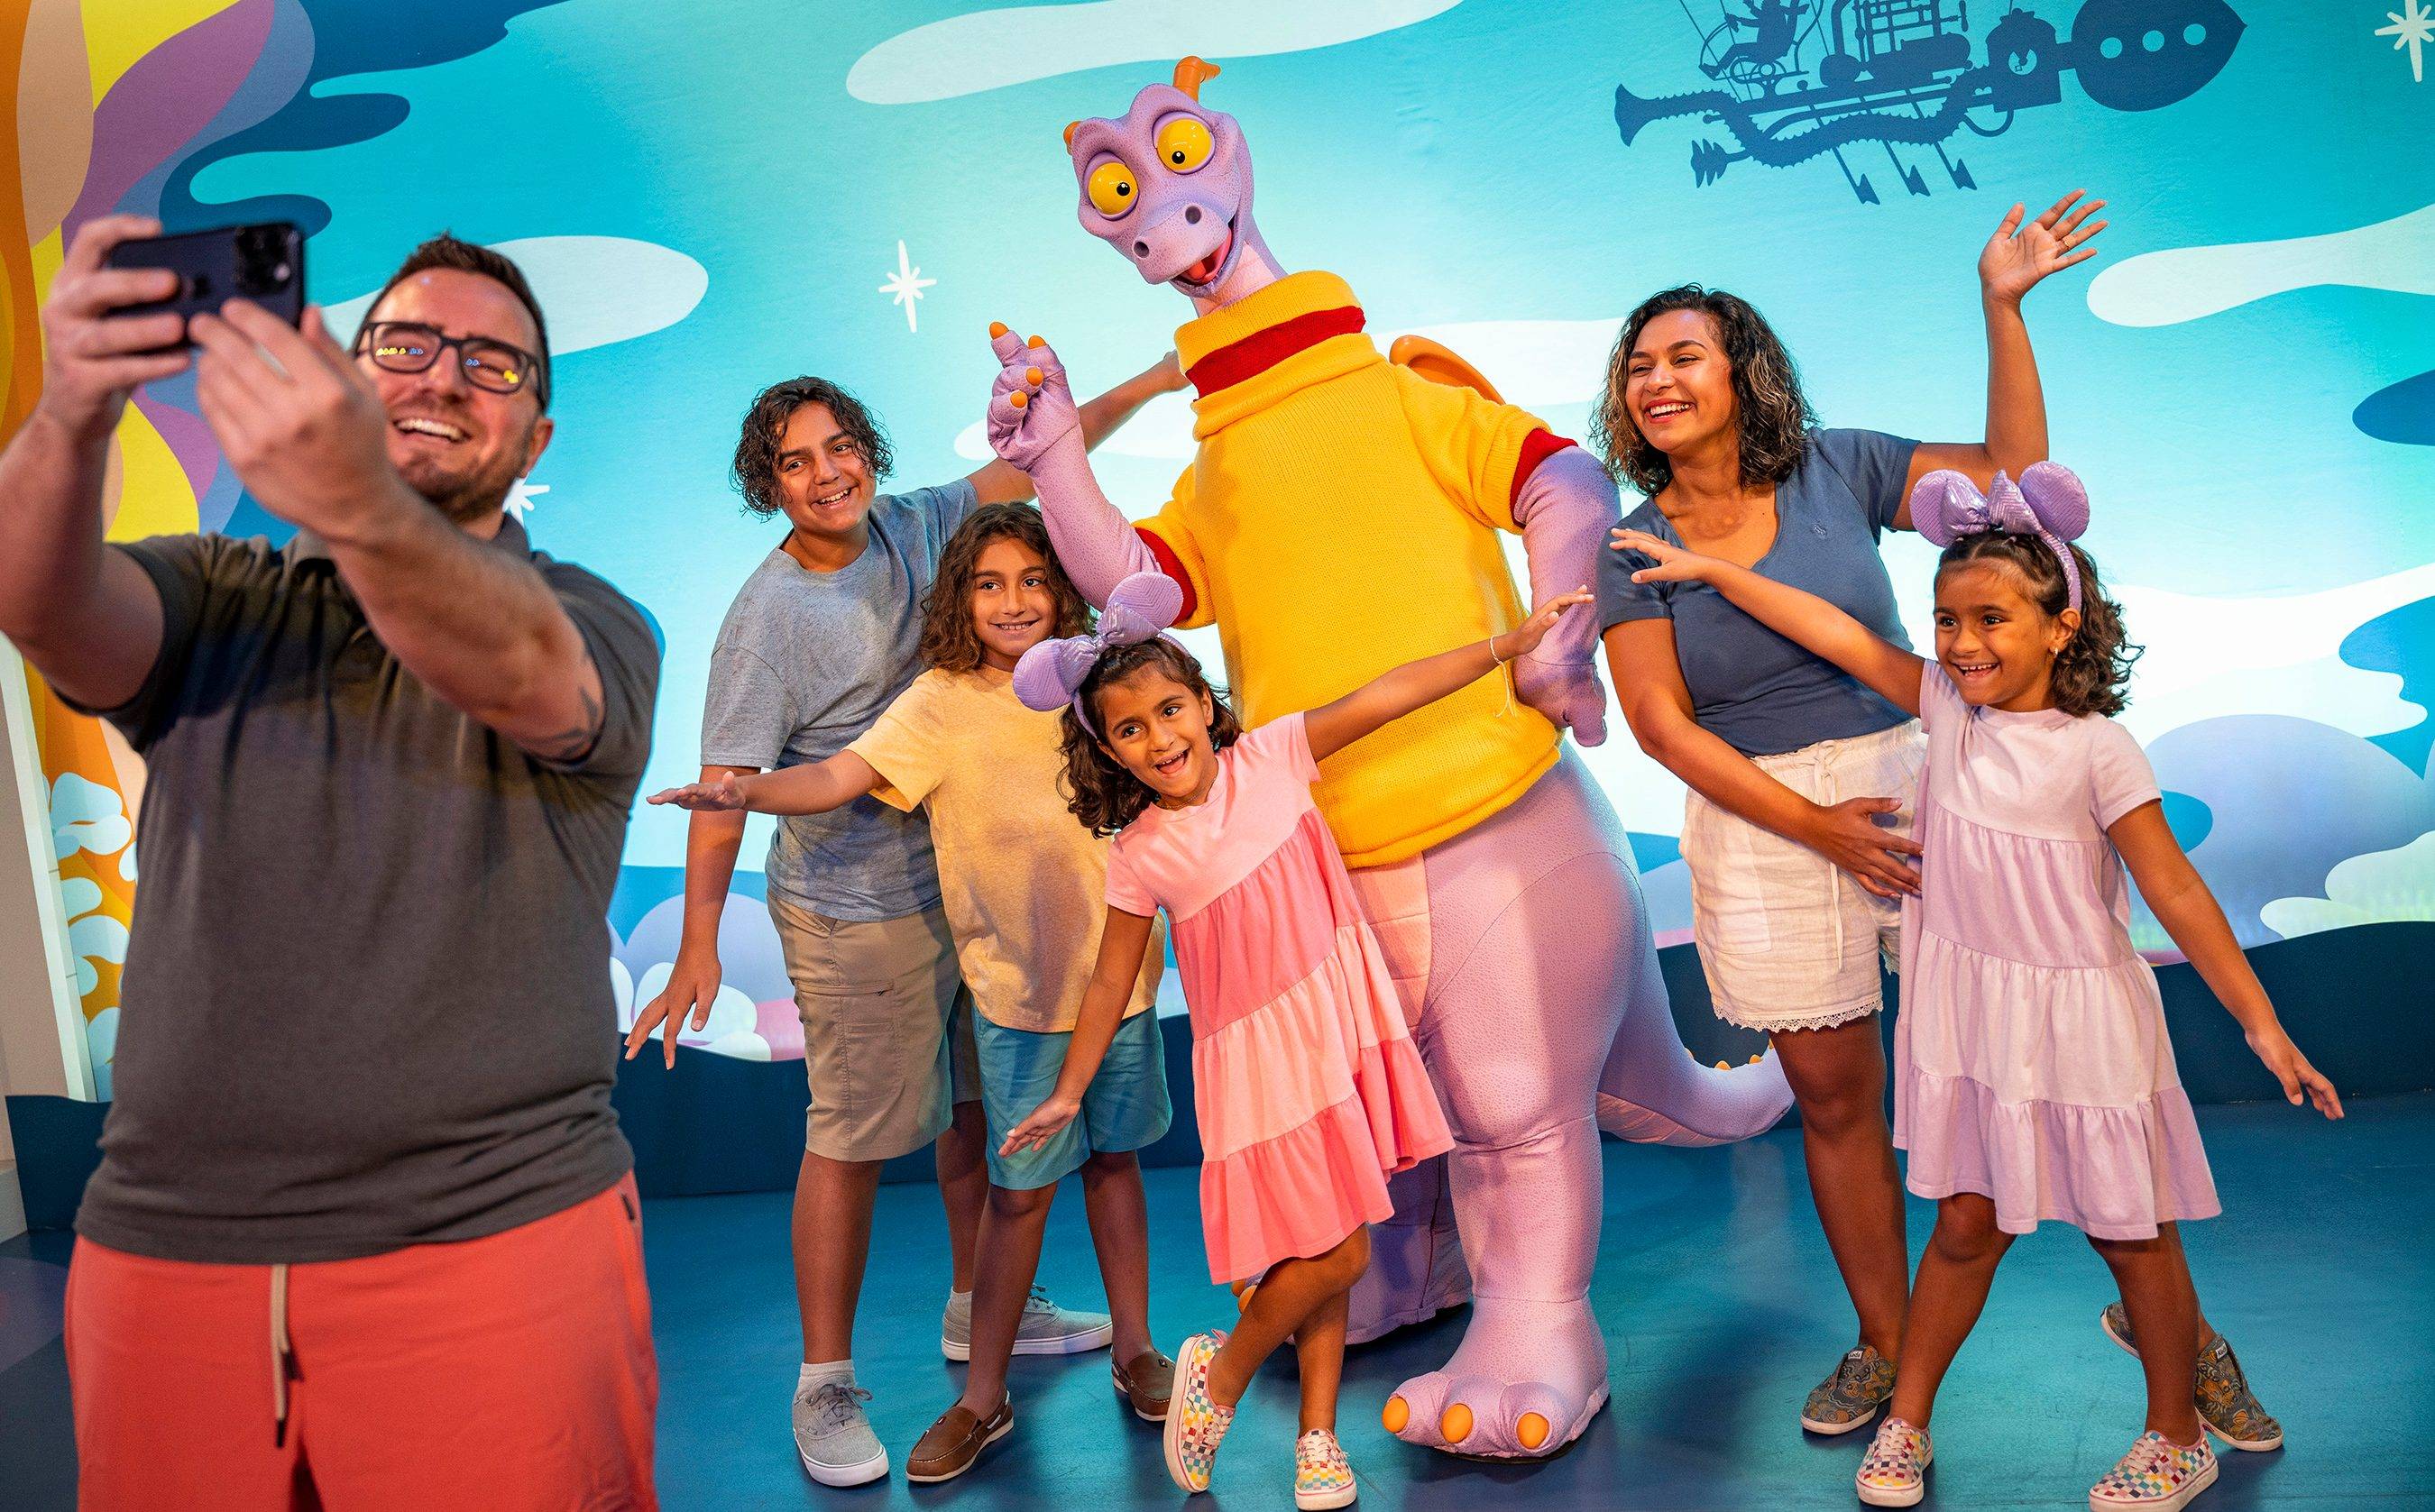 EPCOT's Figment meet and greet schedule added to My Disney Experience